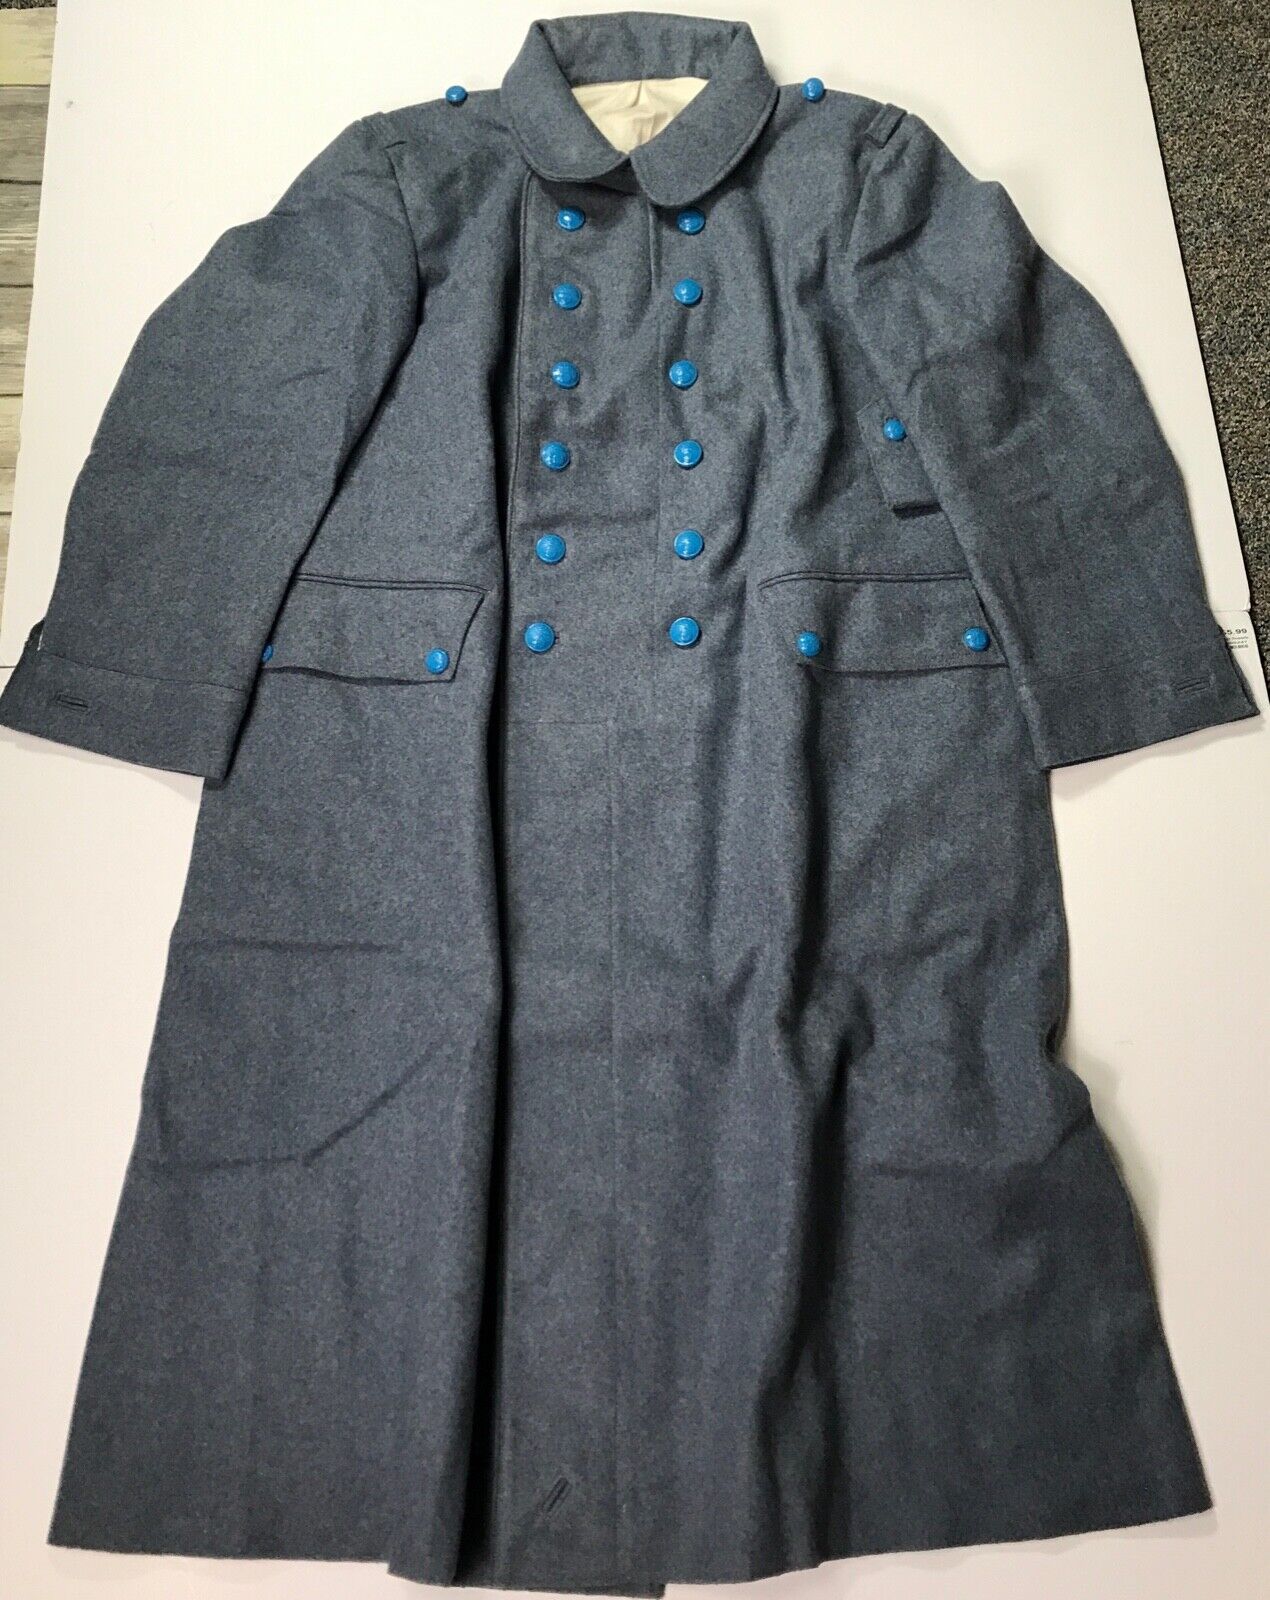 WWI FRENCH M1915 HORIZON BLUE WOOL WINTER OVERCOAT GREATCOAT- SIZE 5 (50-52R)